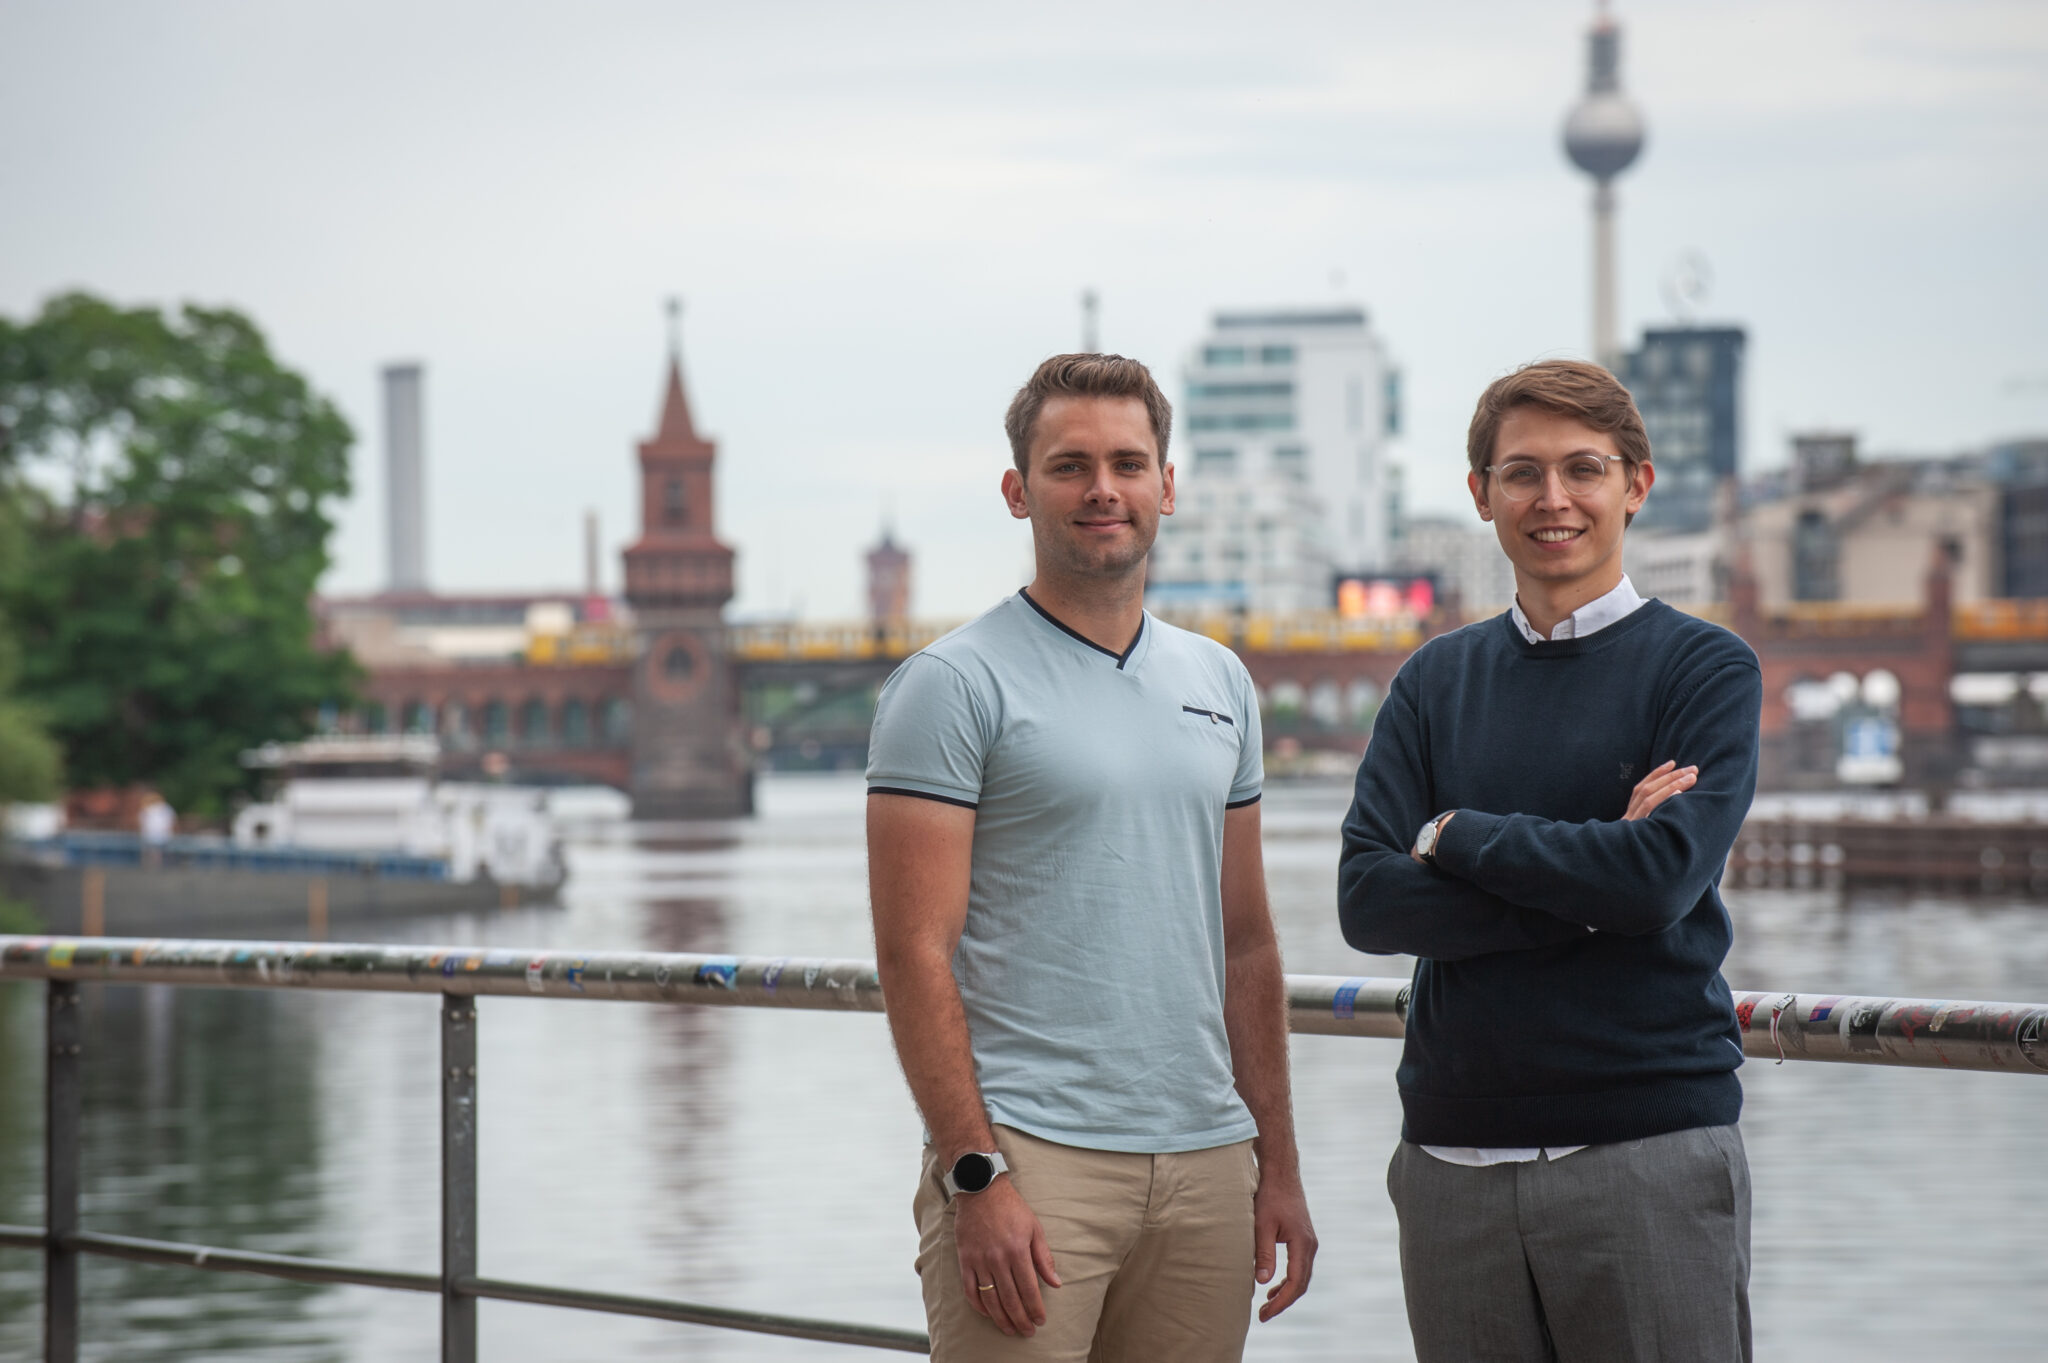 Berlin’s LiveEO lands €19 million to fuel its mission to bring space data insights to industry